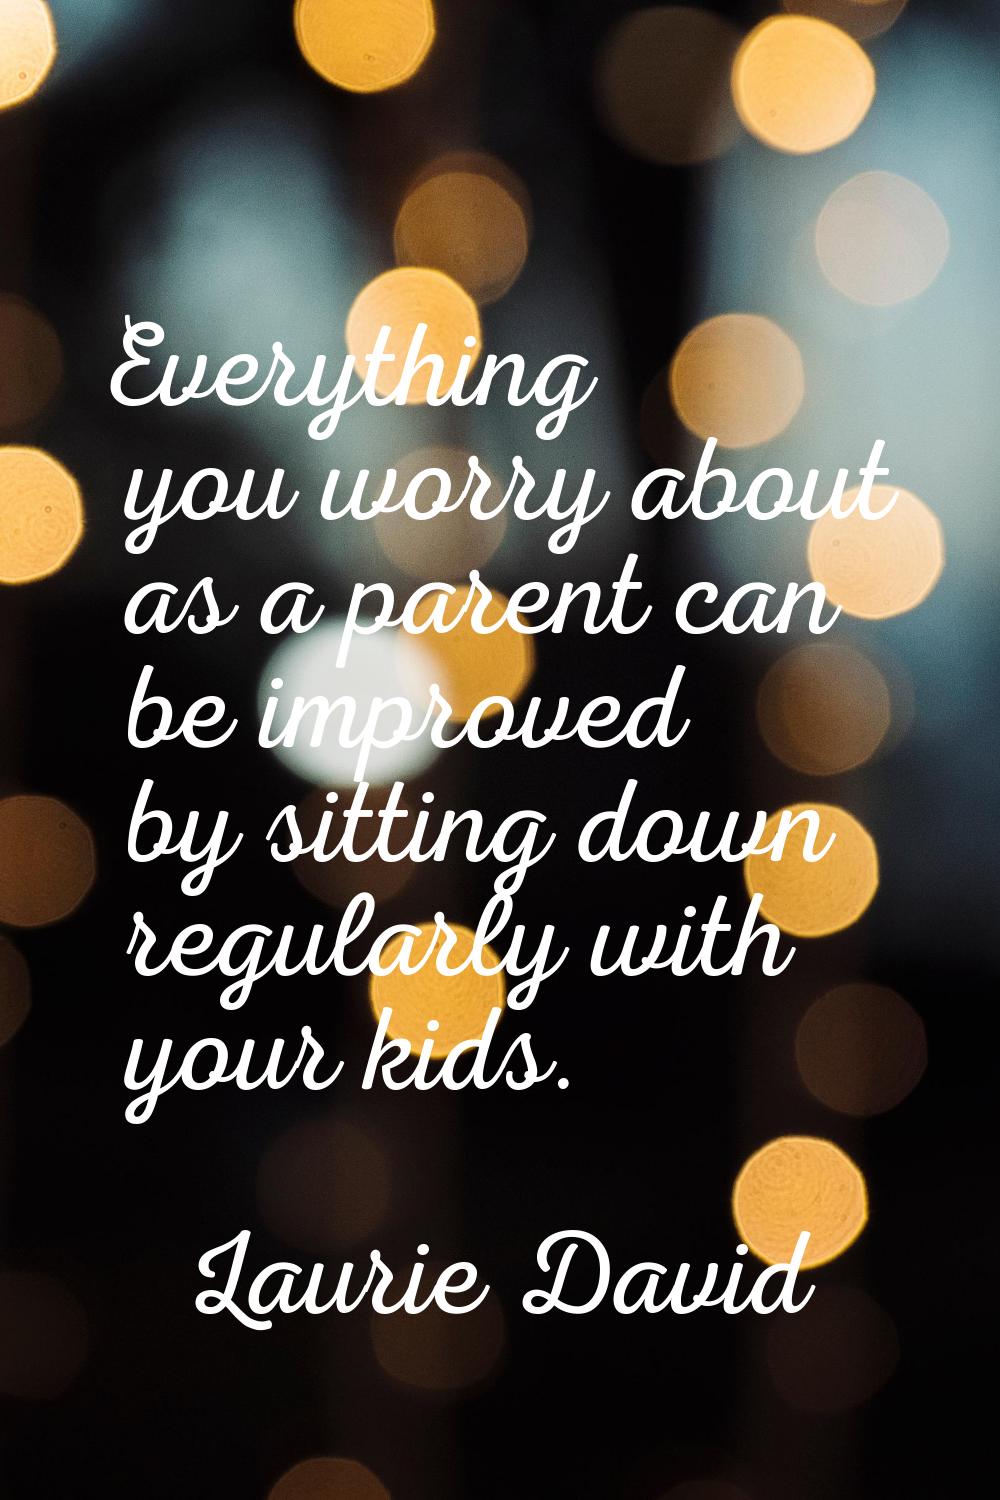 Everything you worry about as a parent can be improved by sitting down regularly with your kids.